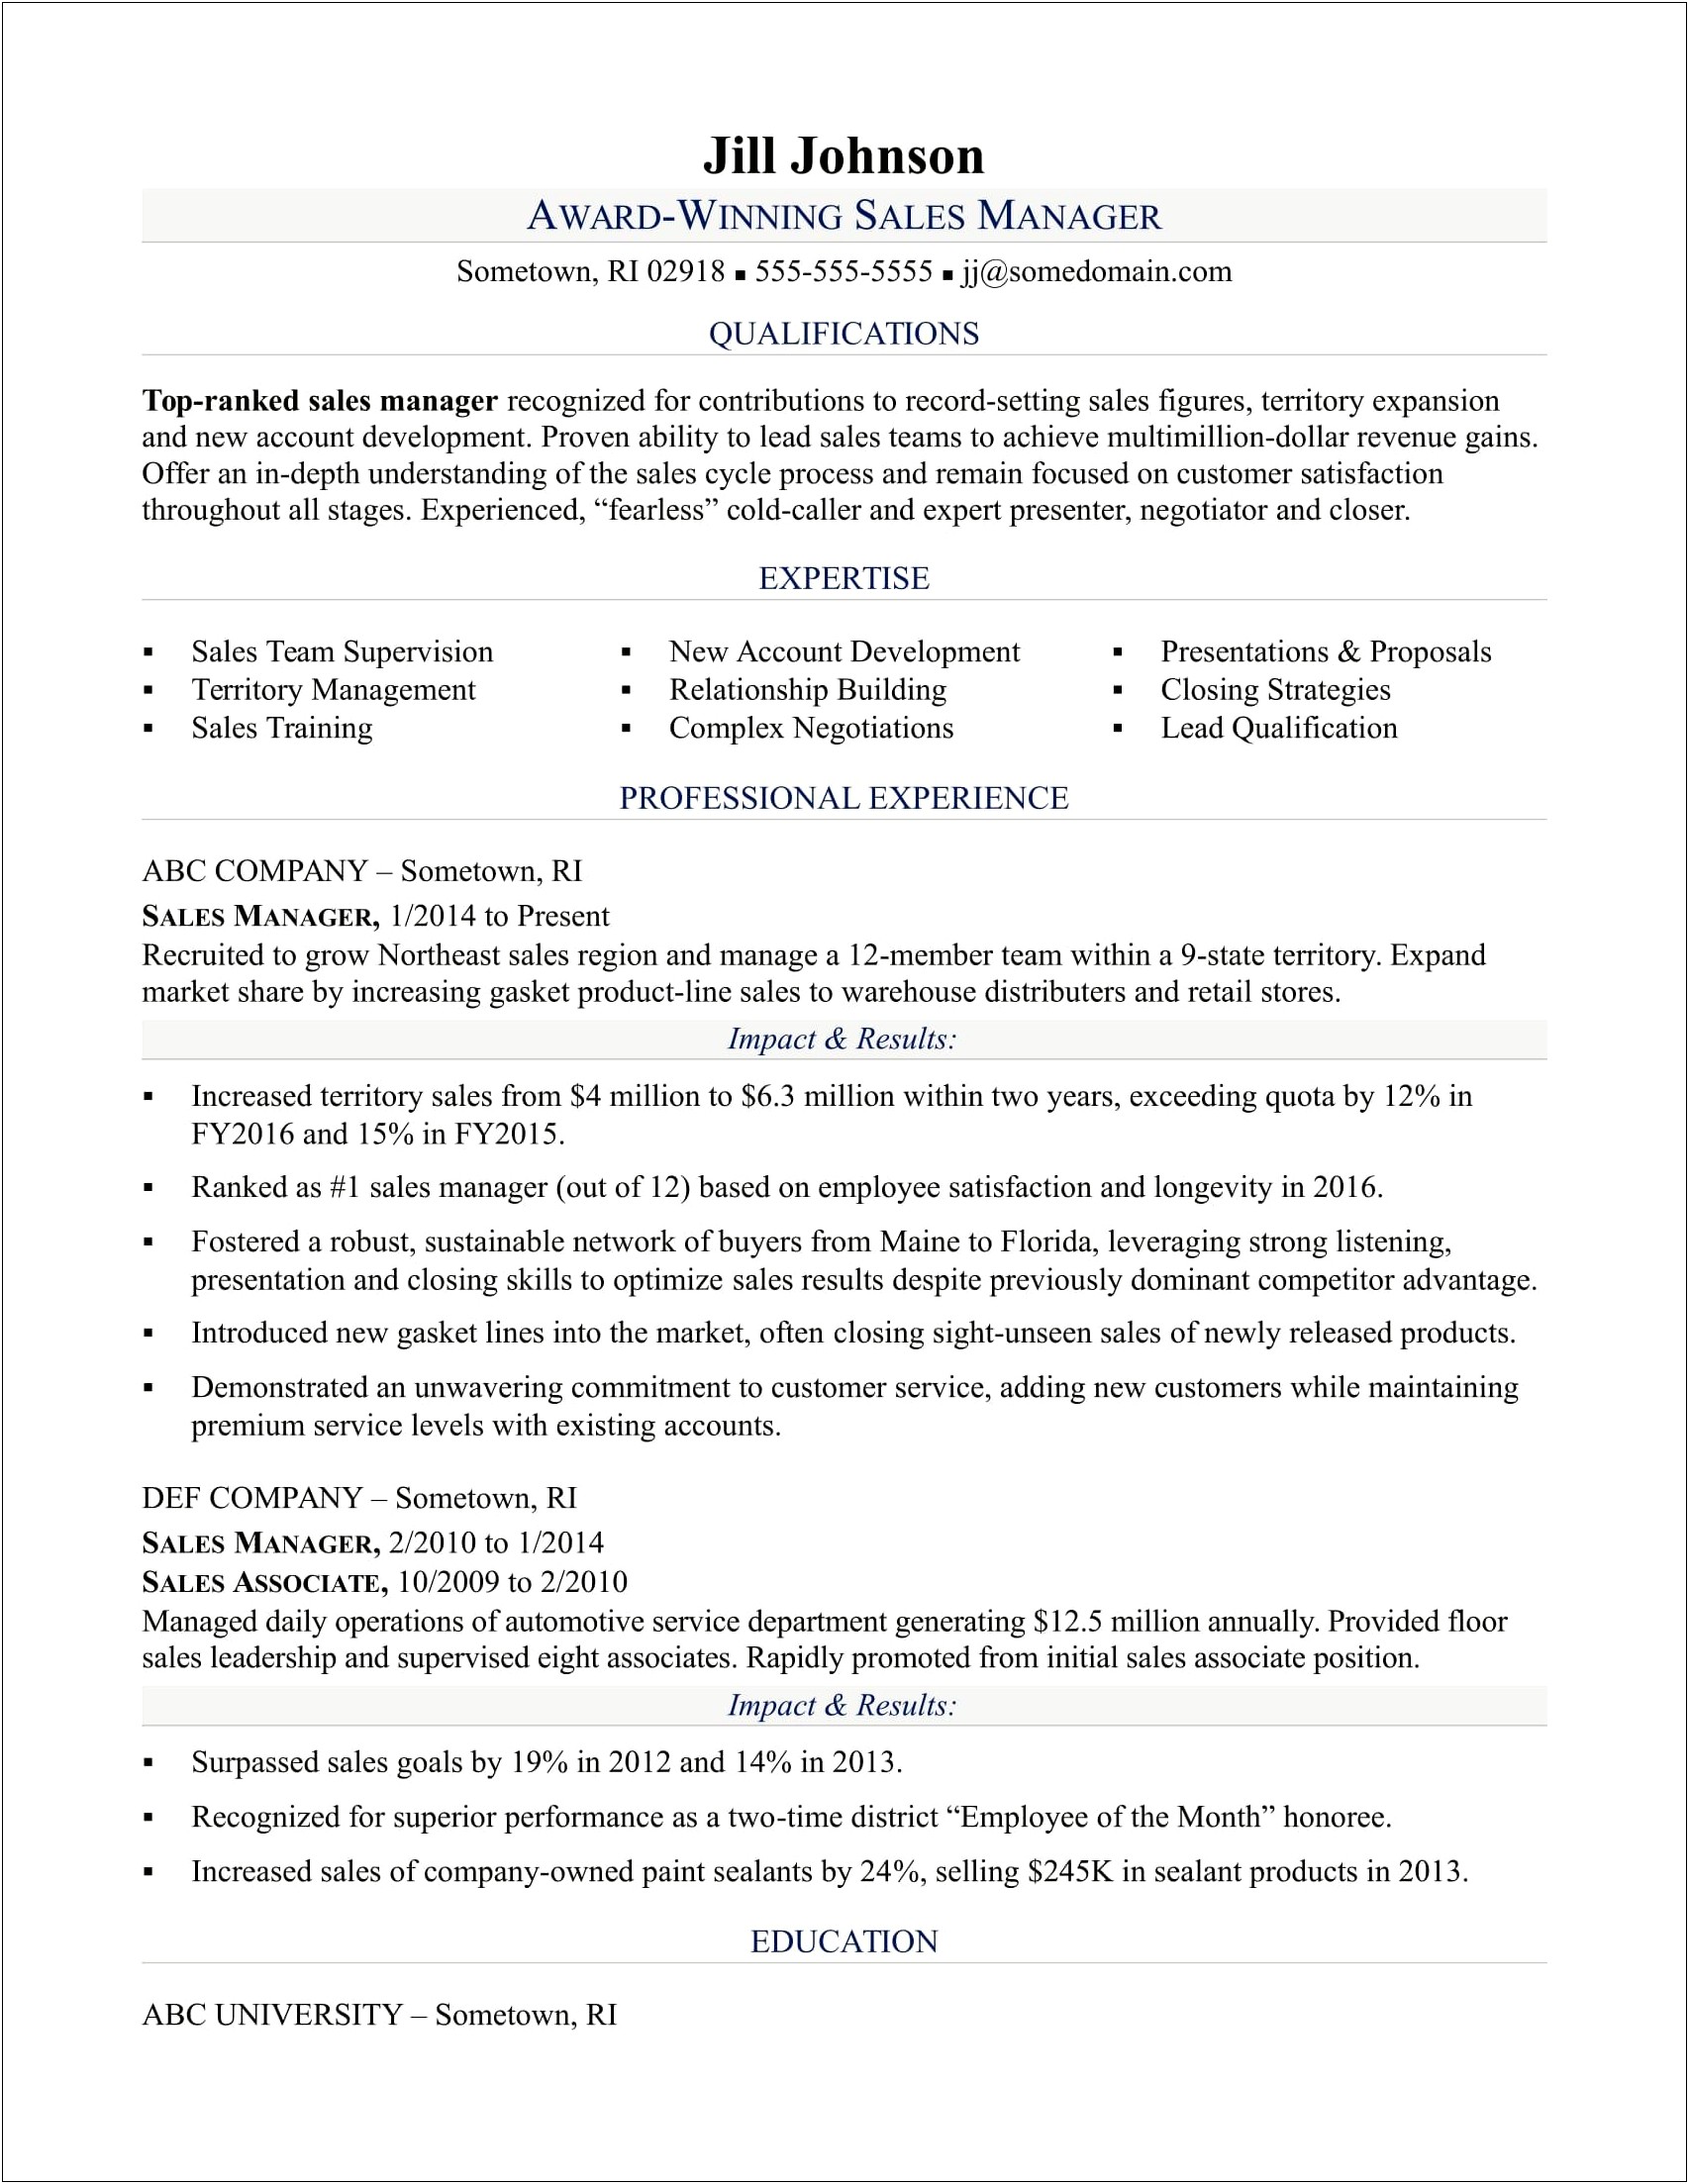 Sample Template For Training Manager Resume